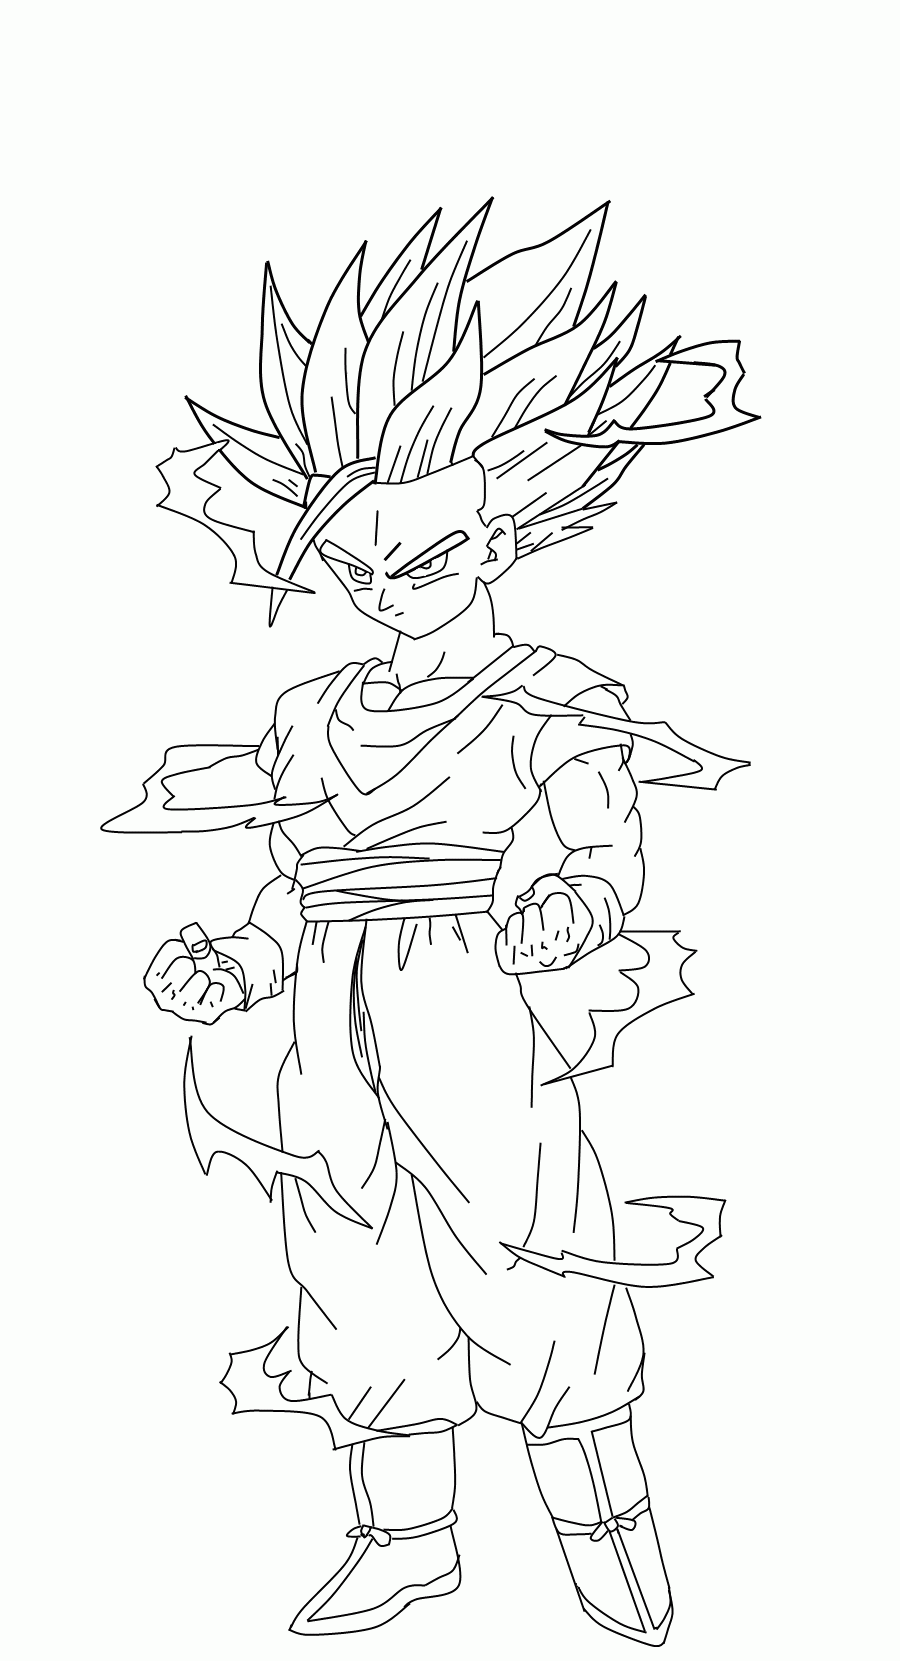 gohan coloring pages | High Quality Coloring Pages